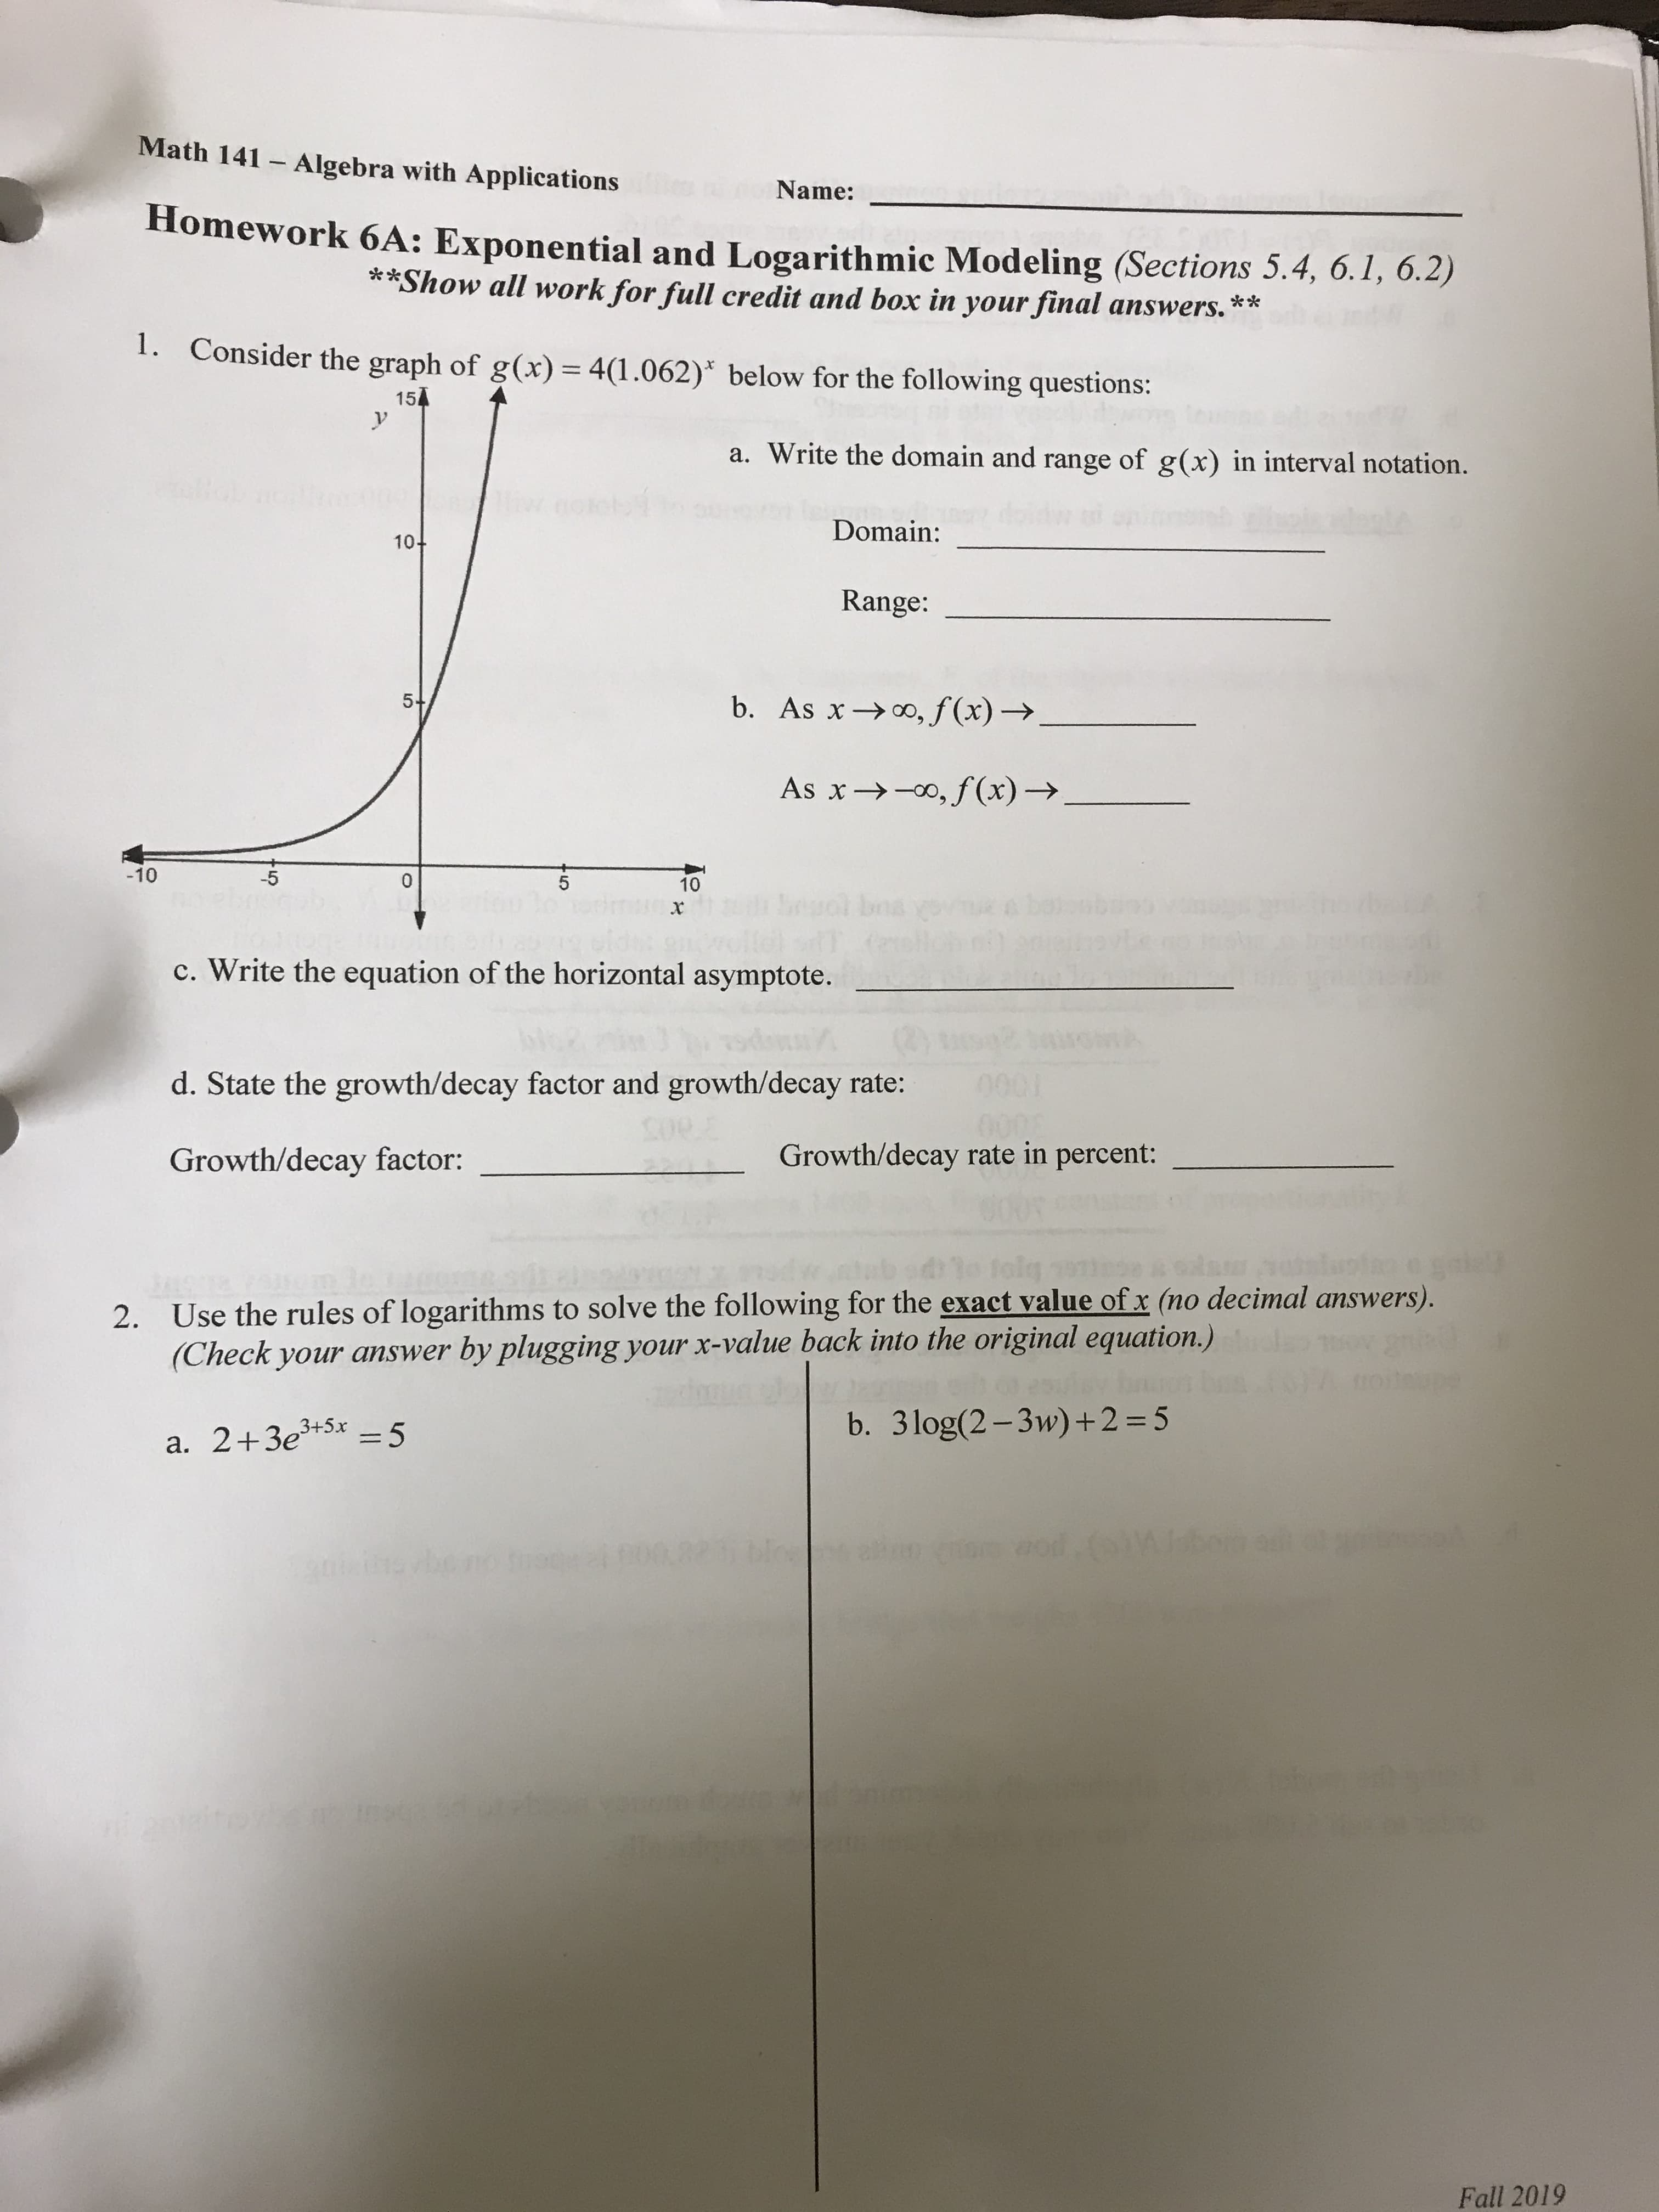 Math 141 Algebra with Applications
Name:
Homework 6A: Exponential and Logarithmic Modeling (Sections 5.4, 6.1, 6.2)
**Show all work for full credit and box in your final answers.**
1.
Consider the graph of g(x) = 4(1.062) below for the following questions:
154
a. Write the domain and range of g(x) in interval notation.
rou
SU
Domain:
10+
Range:
5+
b. As xo,f(x)->.
o,f (x)-
As x
-10
-5
0
5
10
Soual boave
x
c. Write the equation of the horizontal asymptote.
d. State the growth/decay factor and growth/decay rate:
000
Growth/decay rate in percent:
Growth/decay factor:
Use the rules of logarithms to solve the following for the exact value of x (no decimal answers).
(Check your answer
2.
by plugging your x-value back into the original equation.)
b. 3log(2-3w)+2 = 5
a. 2+3e5x 5
u tevbe r
antiton
Fall 2019
